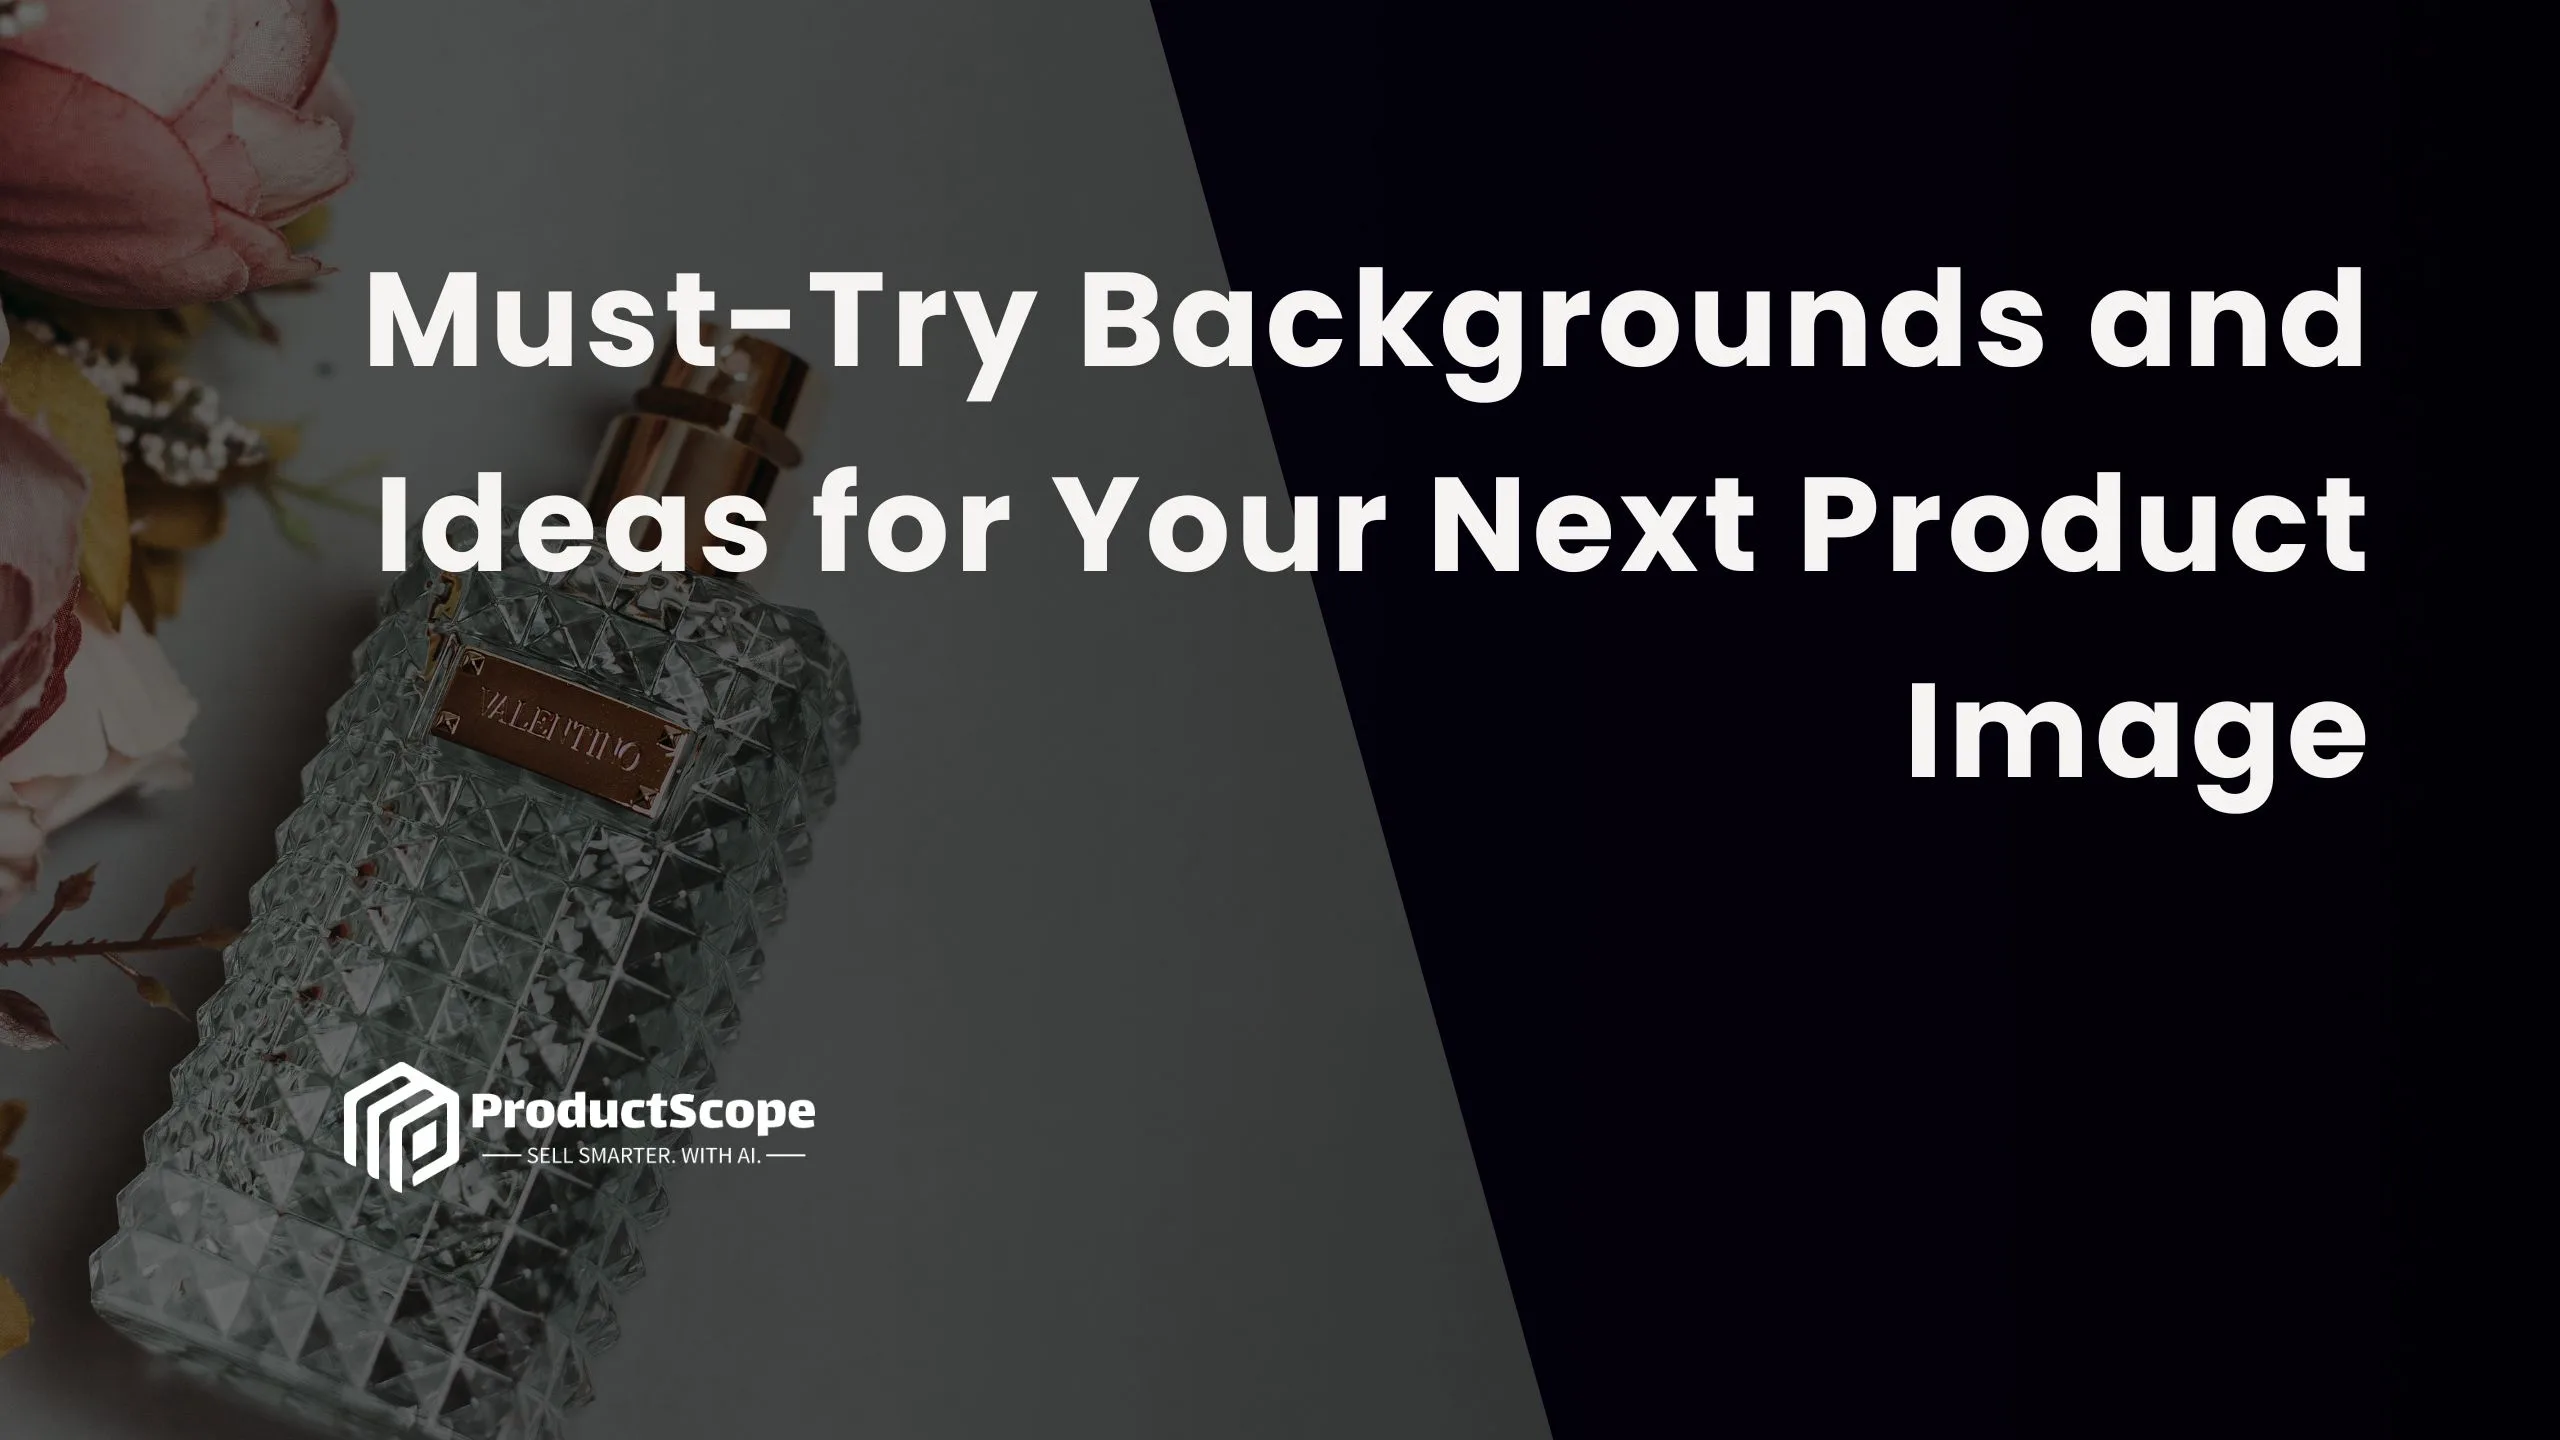 Must-Try Backgrounds and Ideas for Your Next Product Image